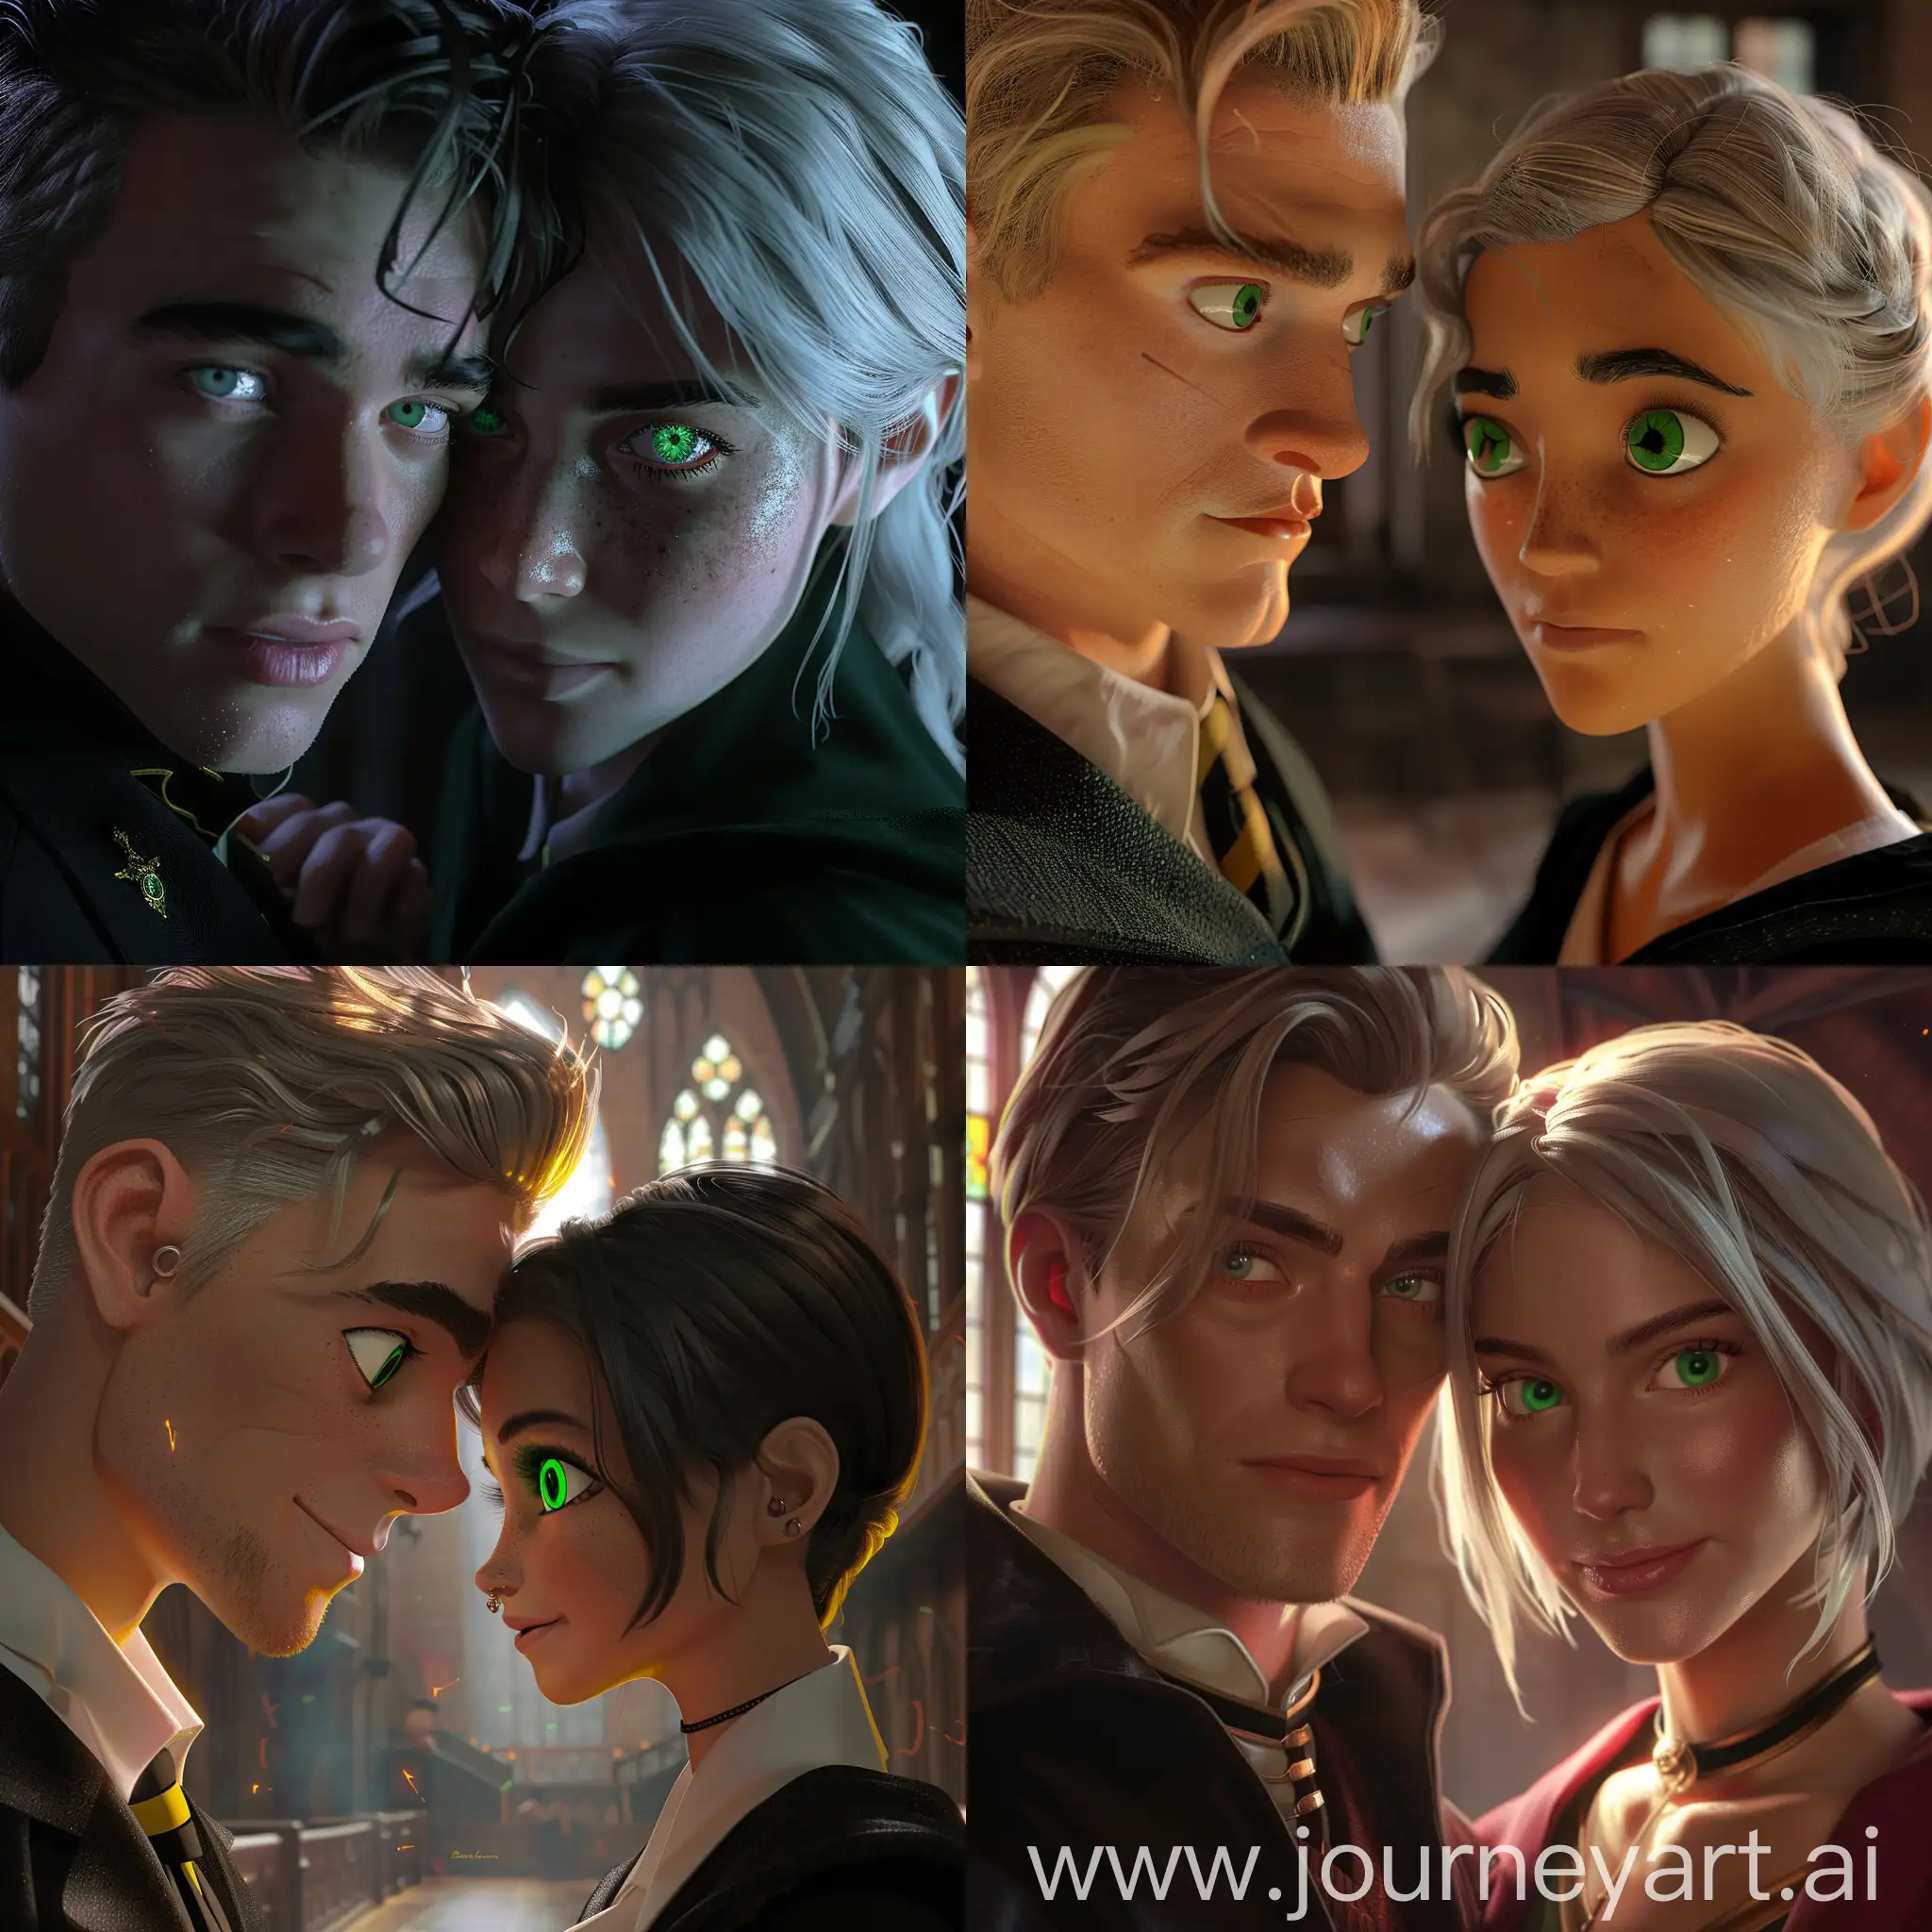 In this AI-generated image, Draco Malfoy with beautiful girl with green eyes, two iconic characters from the wizarding world, are portrayed in a captivating 1:1 aspect ratio. The composition captures a moment of magical encounter between the characters, highlighting their unique personalities and dynamics.